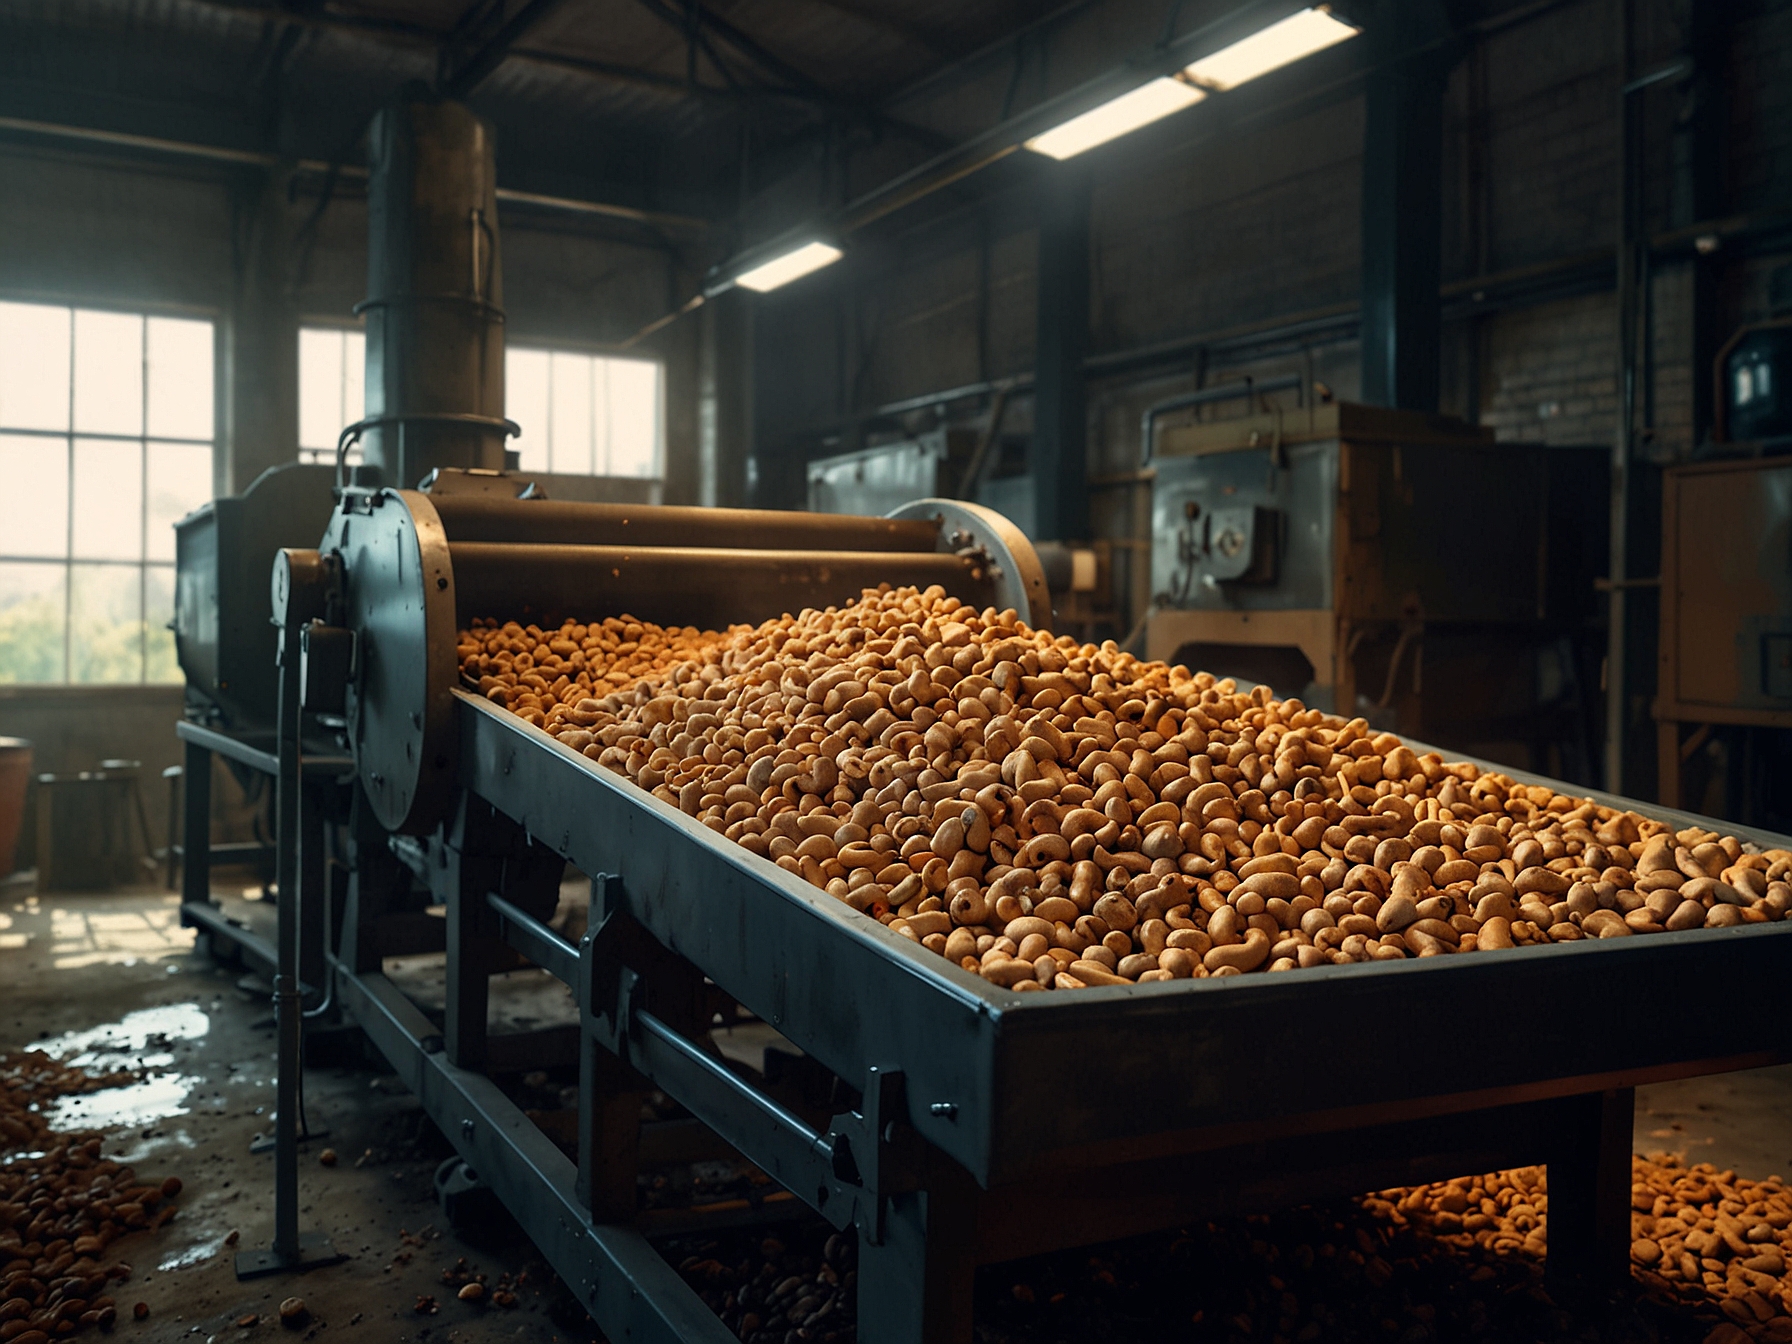 A close-up of cashew nut shells being processed through pyrolysis to create biofuel, showcasing the innovative technology behind converting agricultural waste to energy.